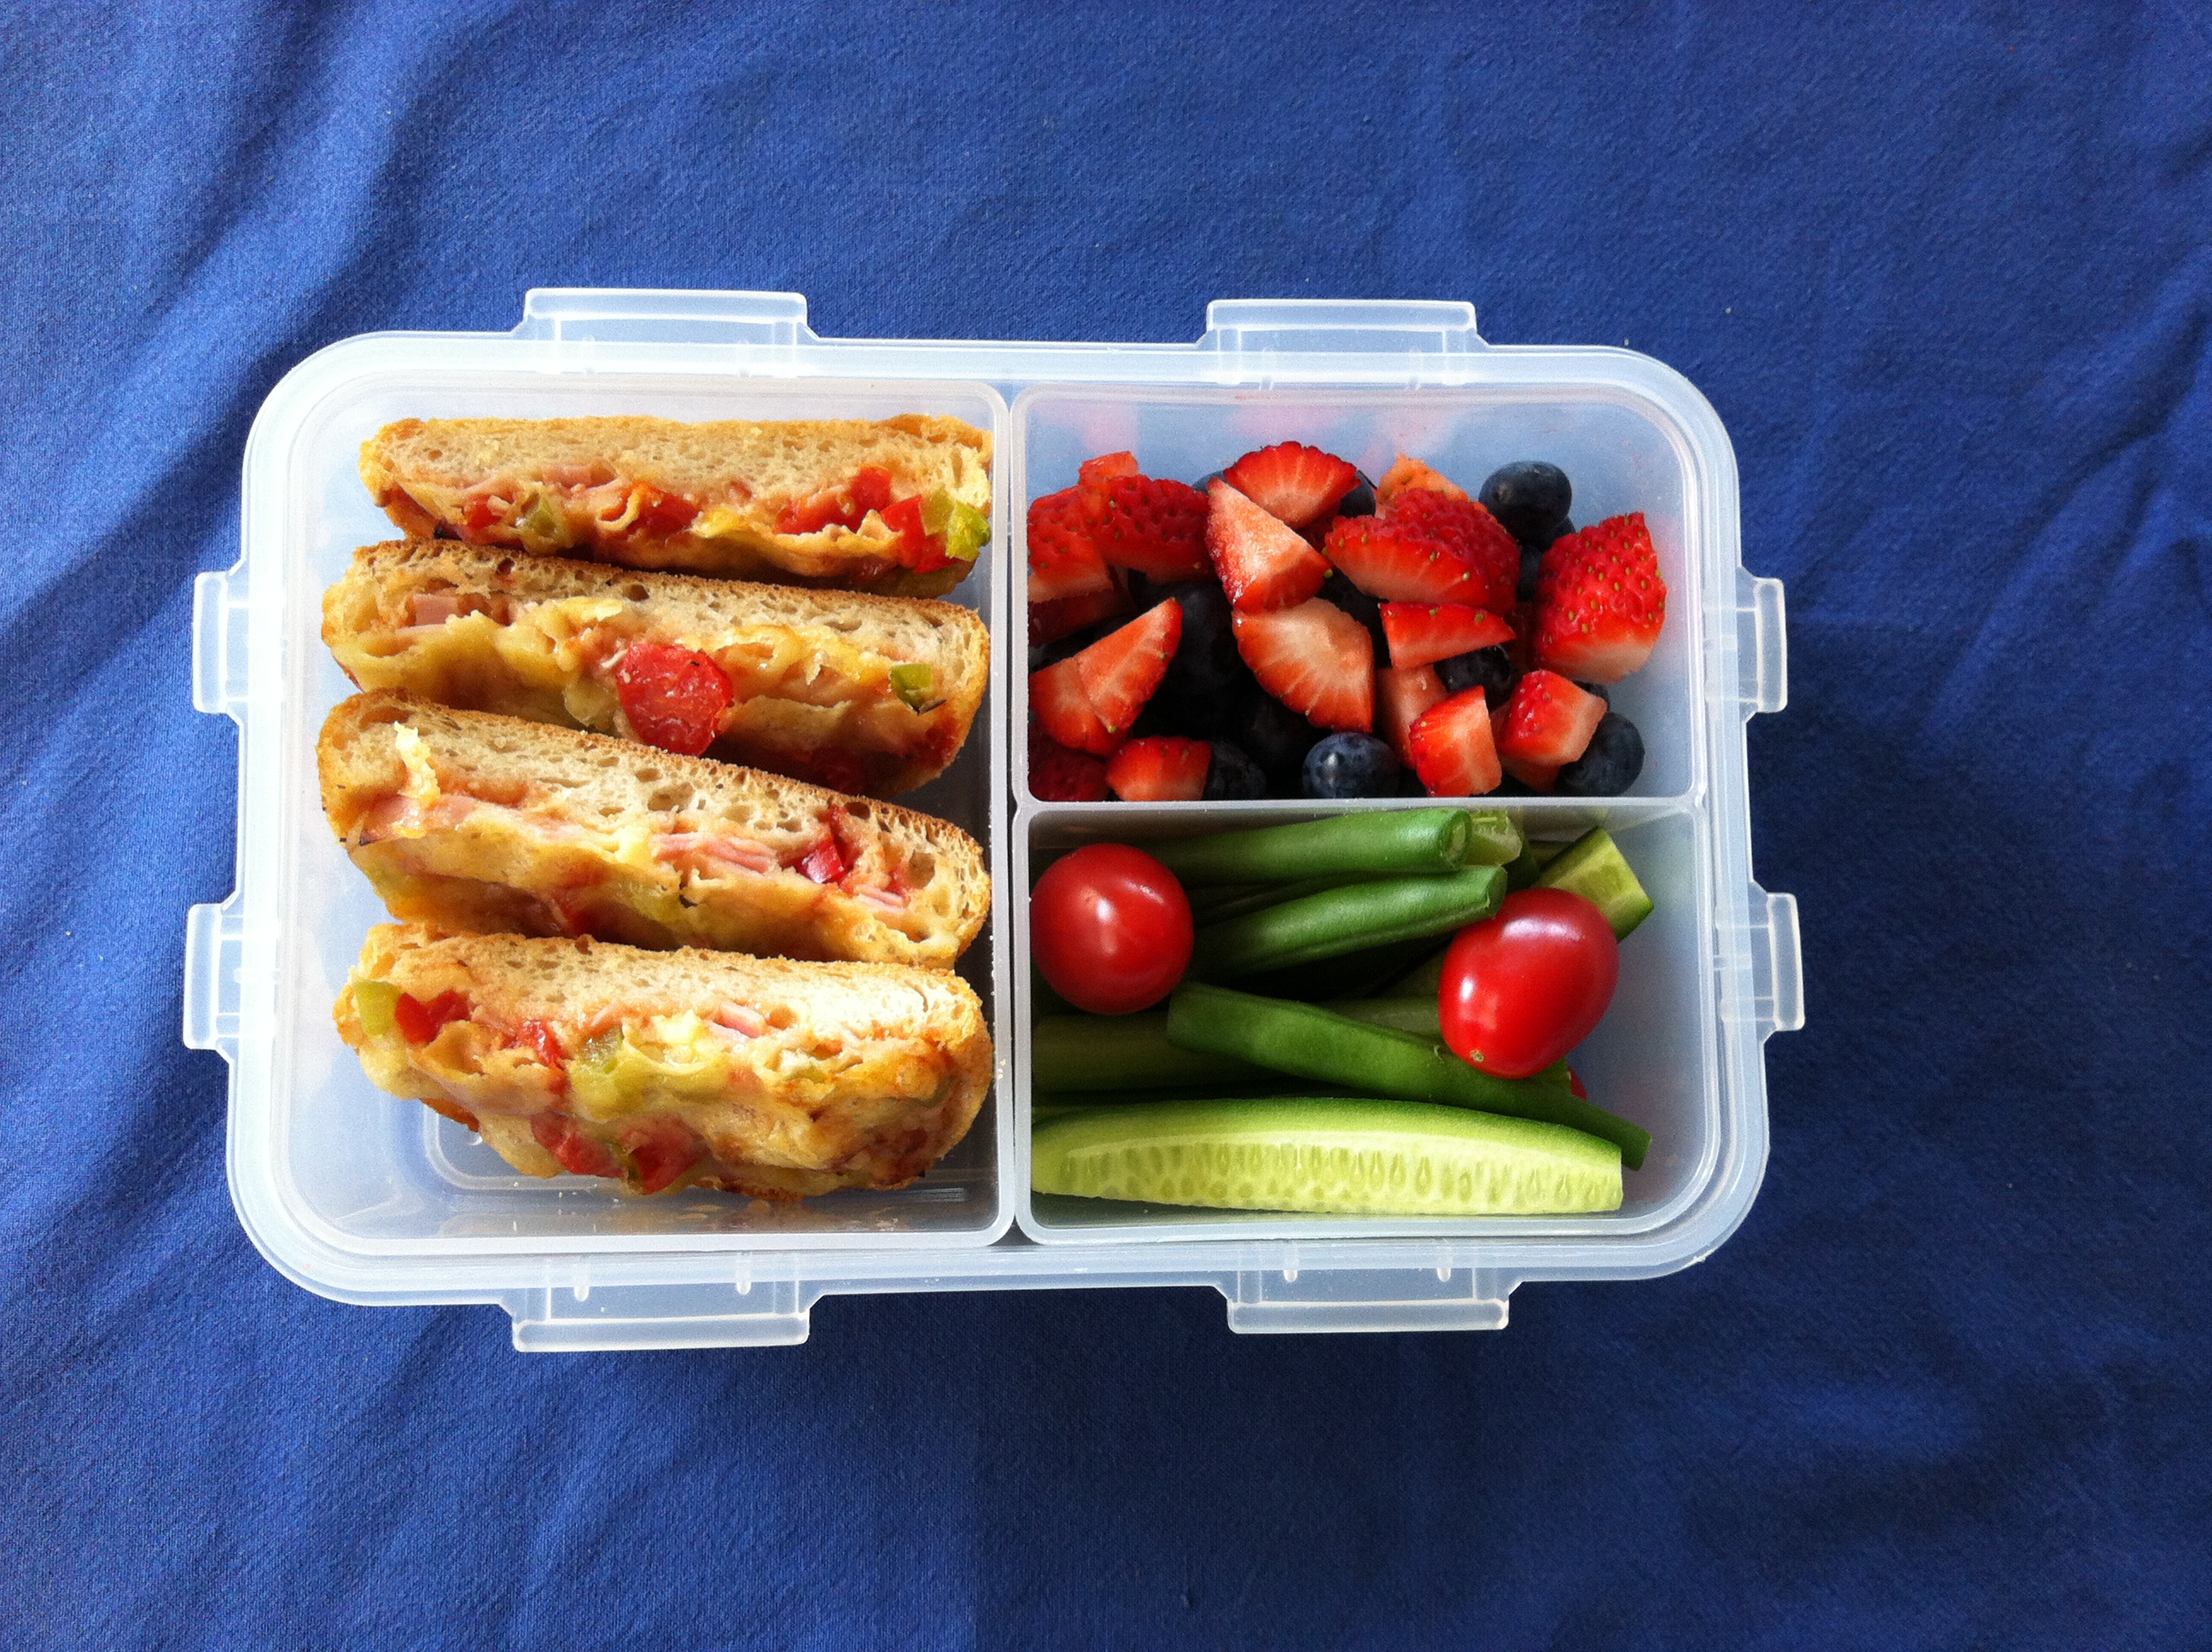 Lunch box leftovers (and more) - Healthy Kids